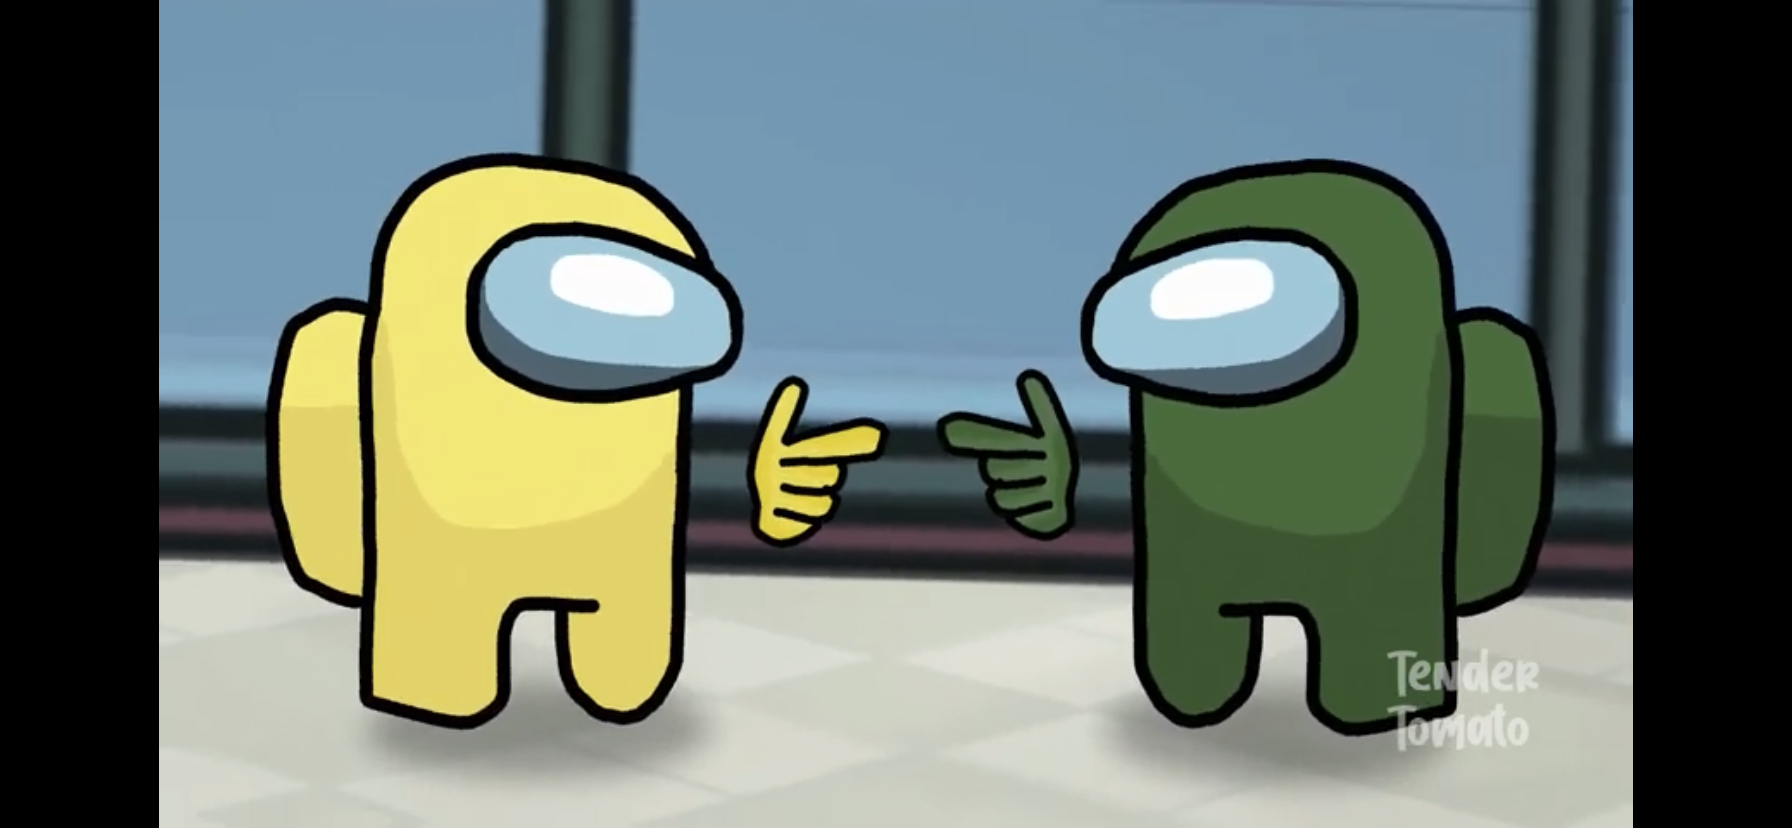 High Quality Cremates pointing at each other Blank Meme Template